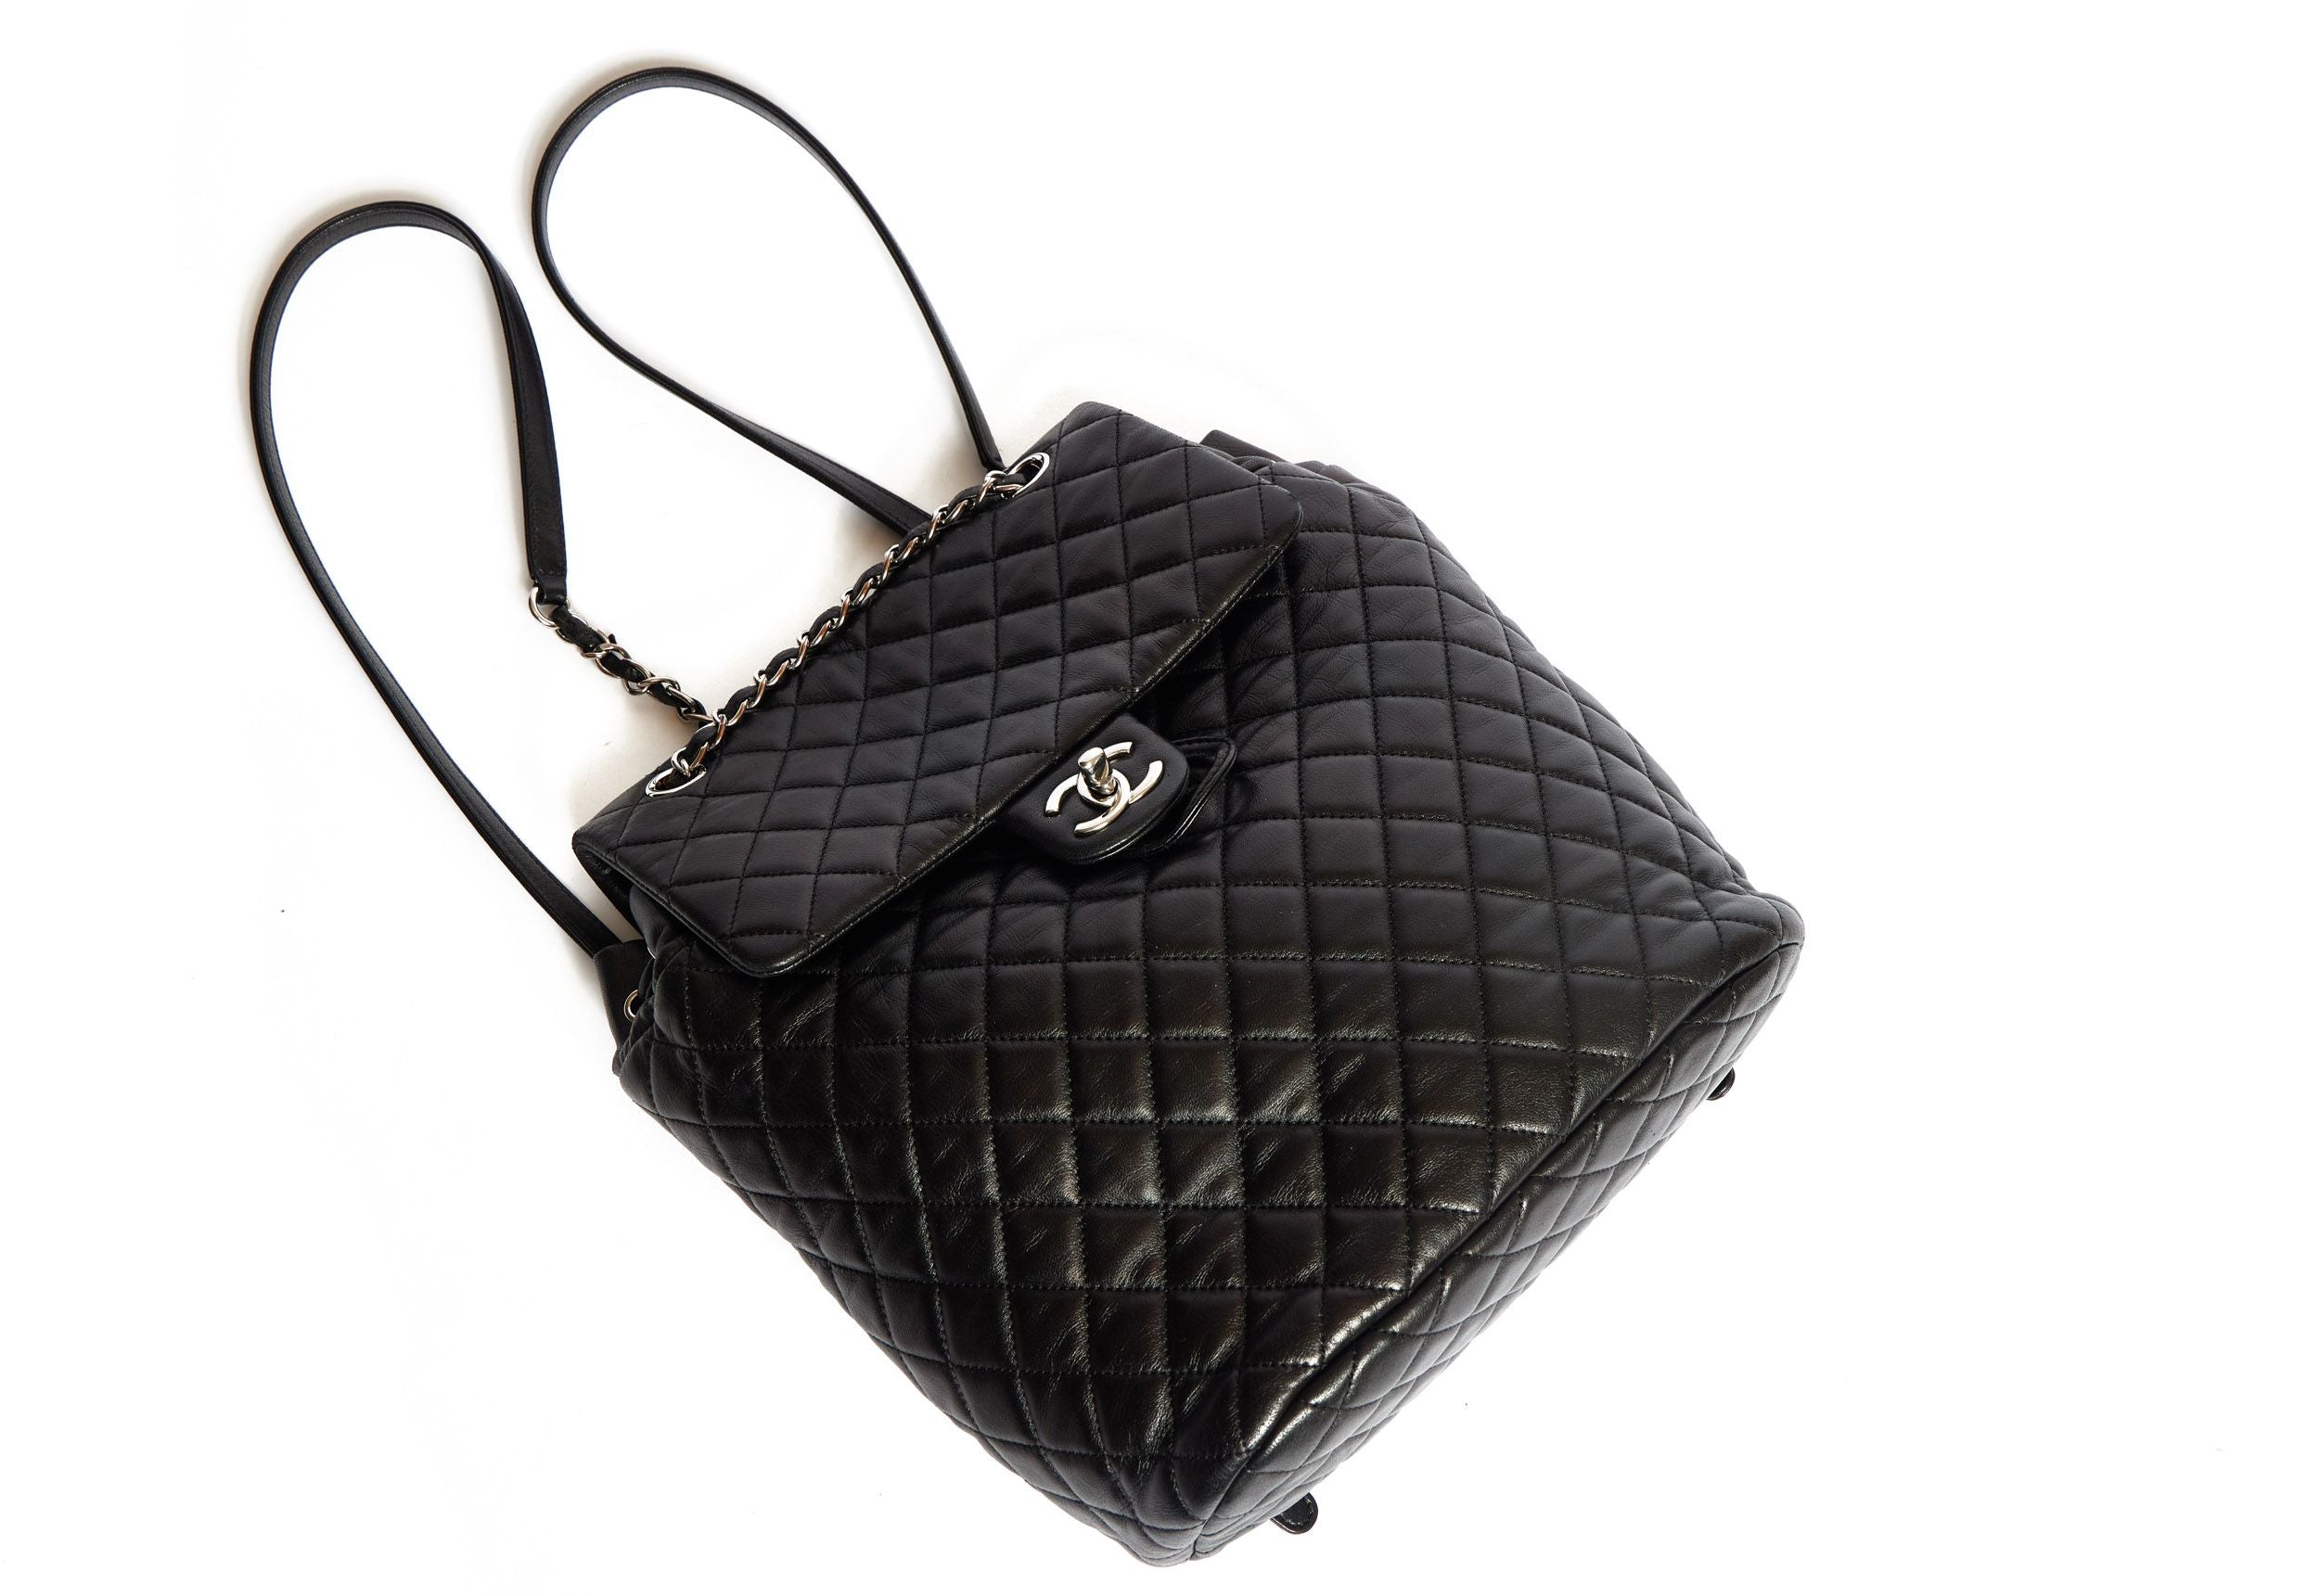 Chanel CC Charm Quilted Lambskin Patent Leather Bag